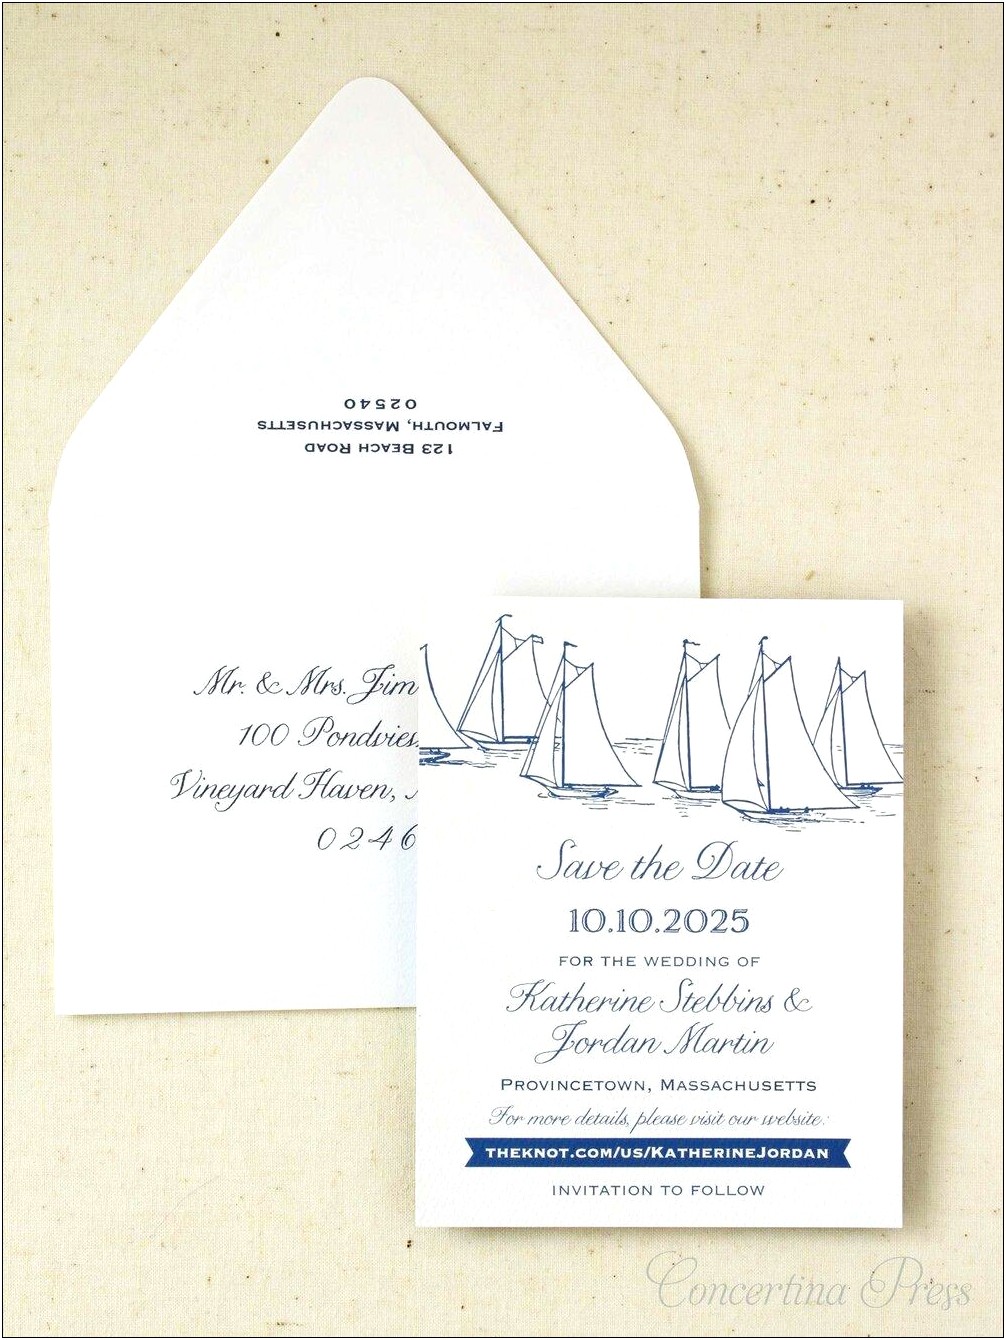 Do You Hyphenate Numbers On Wedding Invitations